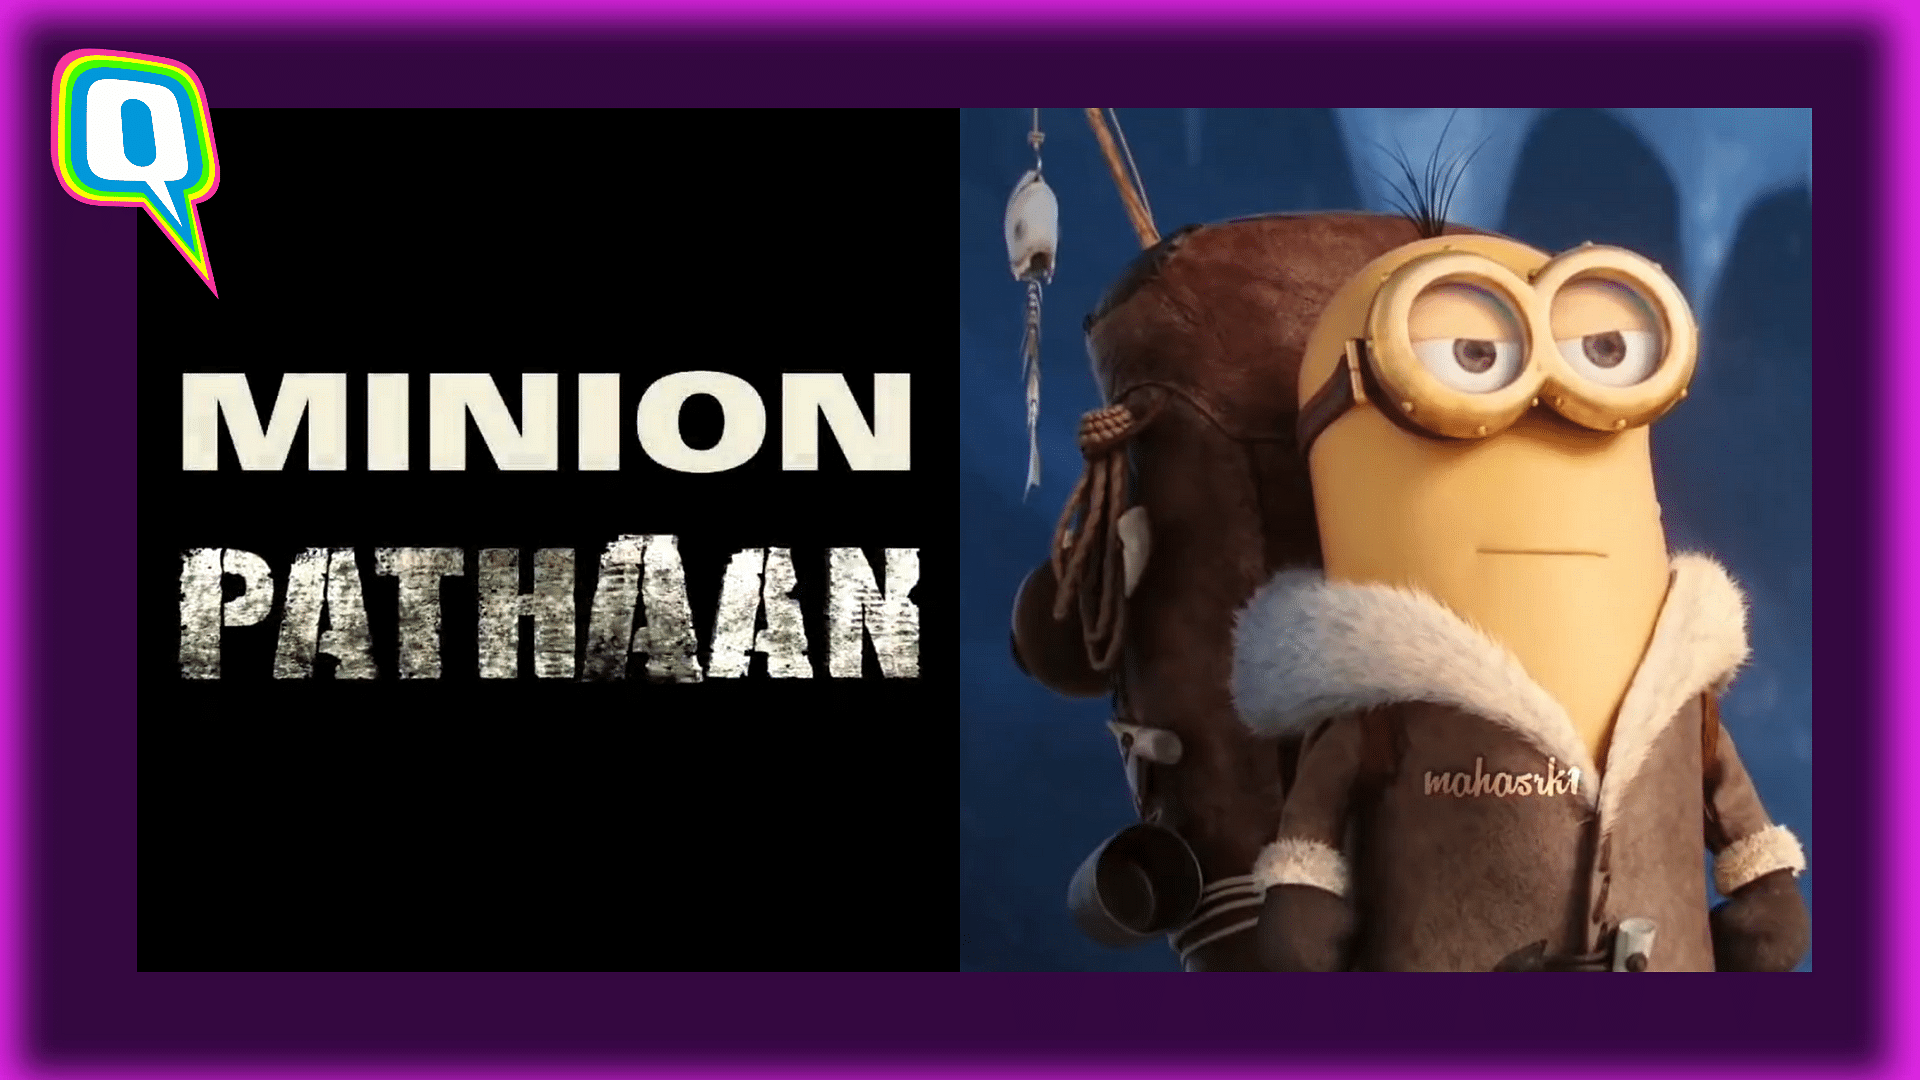 <div class="paragraphs"><p>This Fan-Made Pathaan Trailer Featuring Minions Is Twitter's Latest Obsession</p></div>